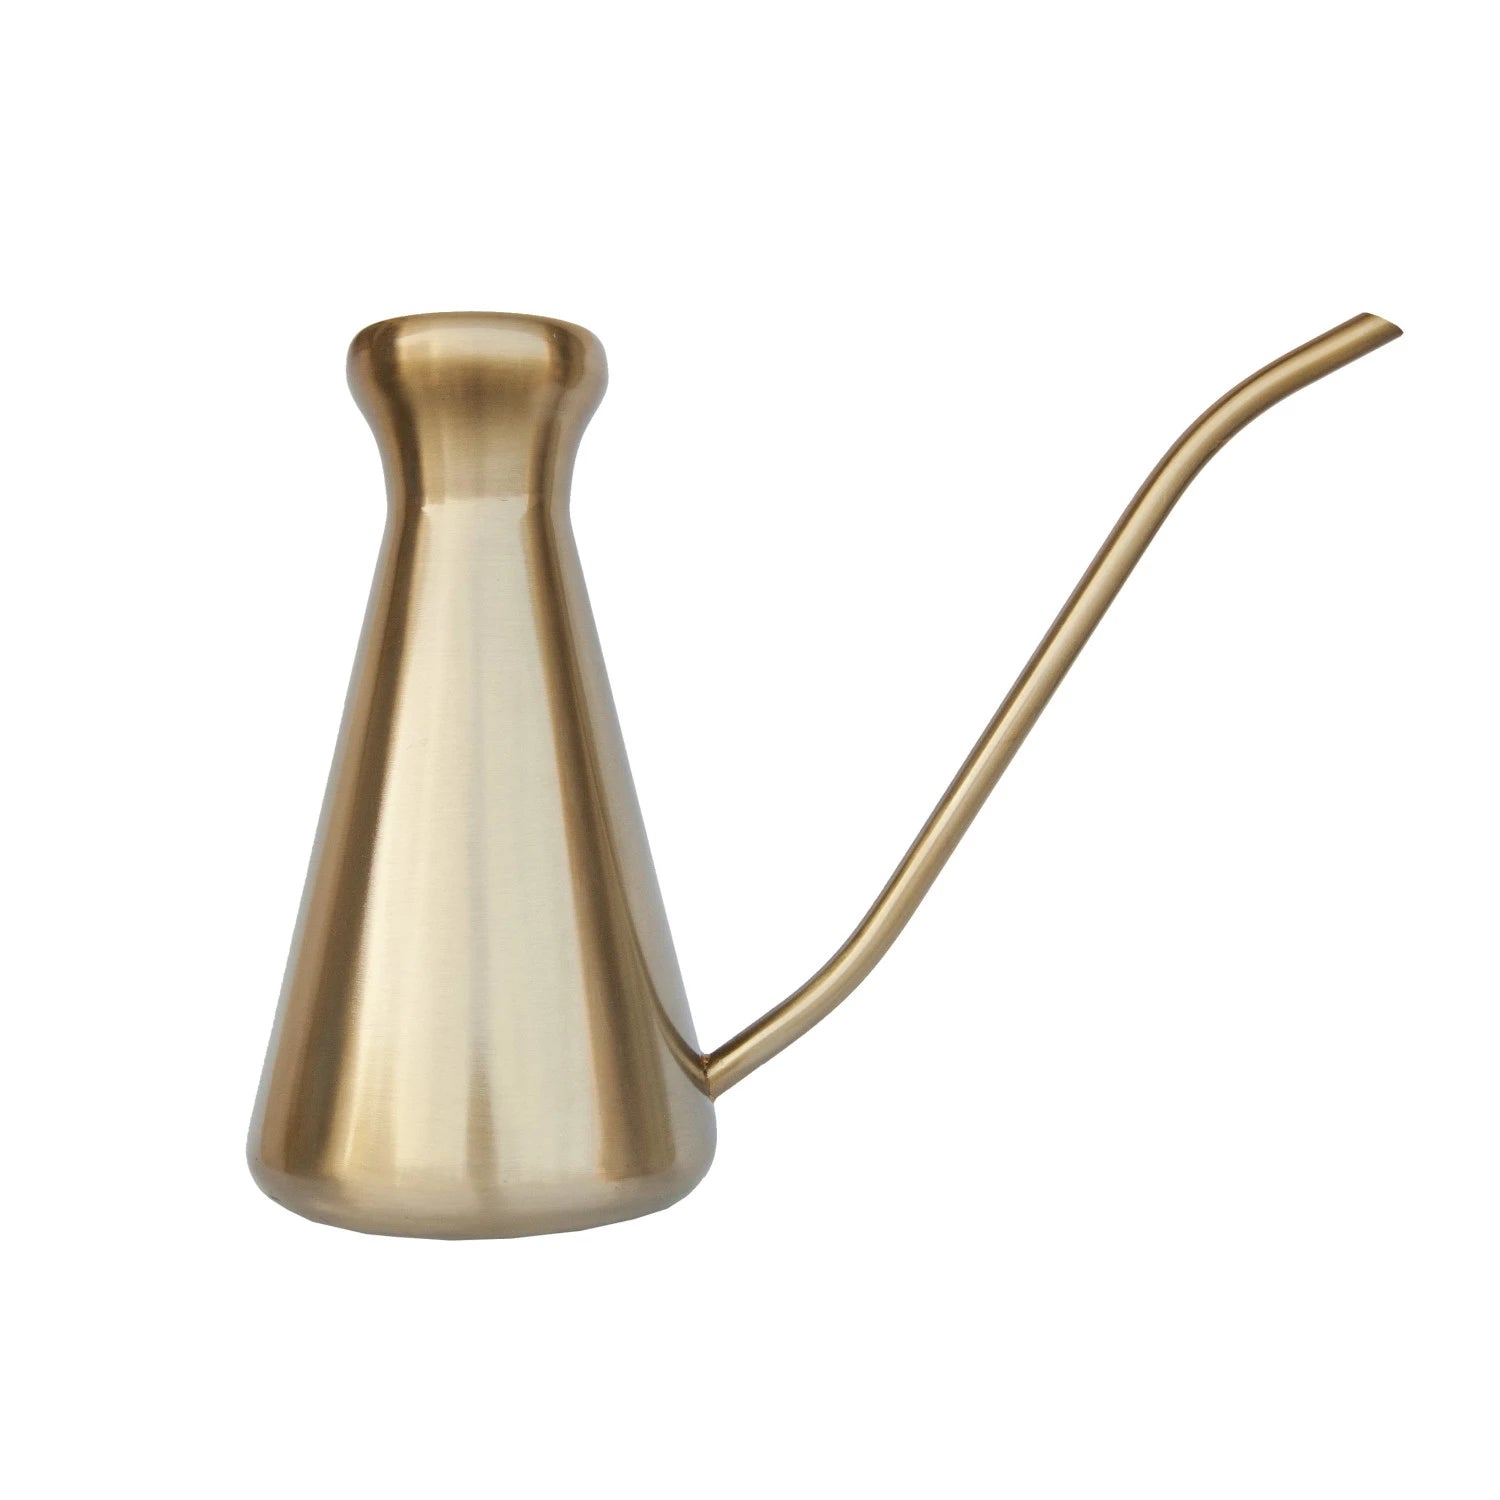 Two-Quart Stainless Steel Watering Can, Brass Finish